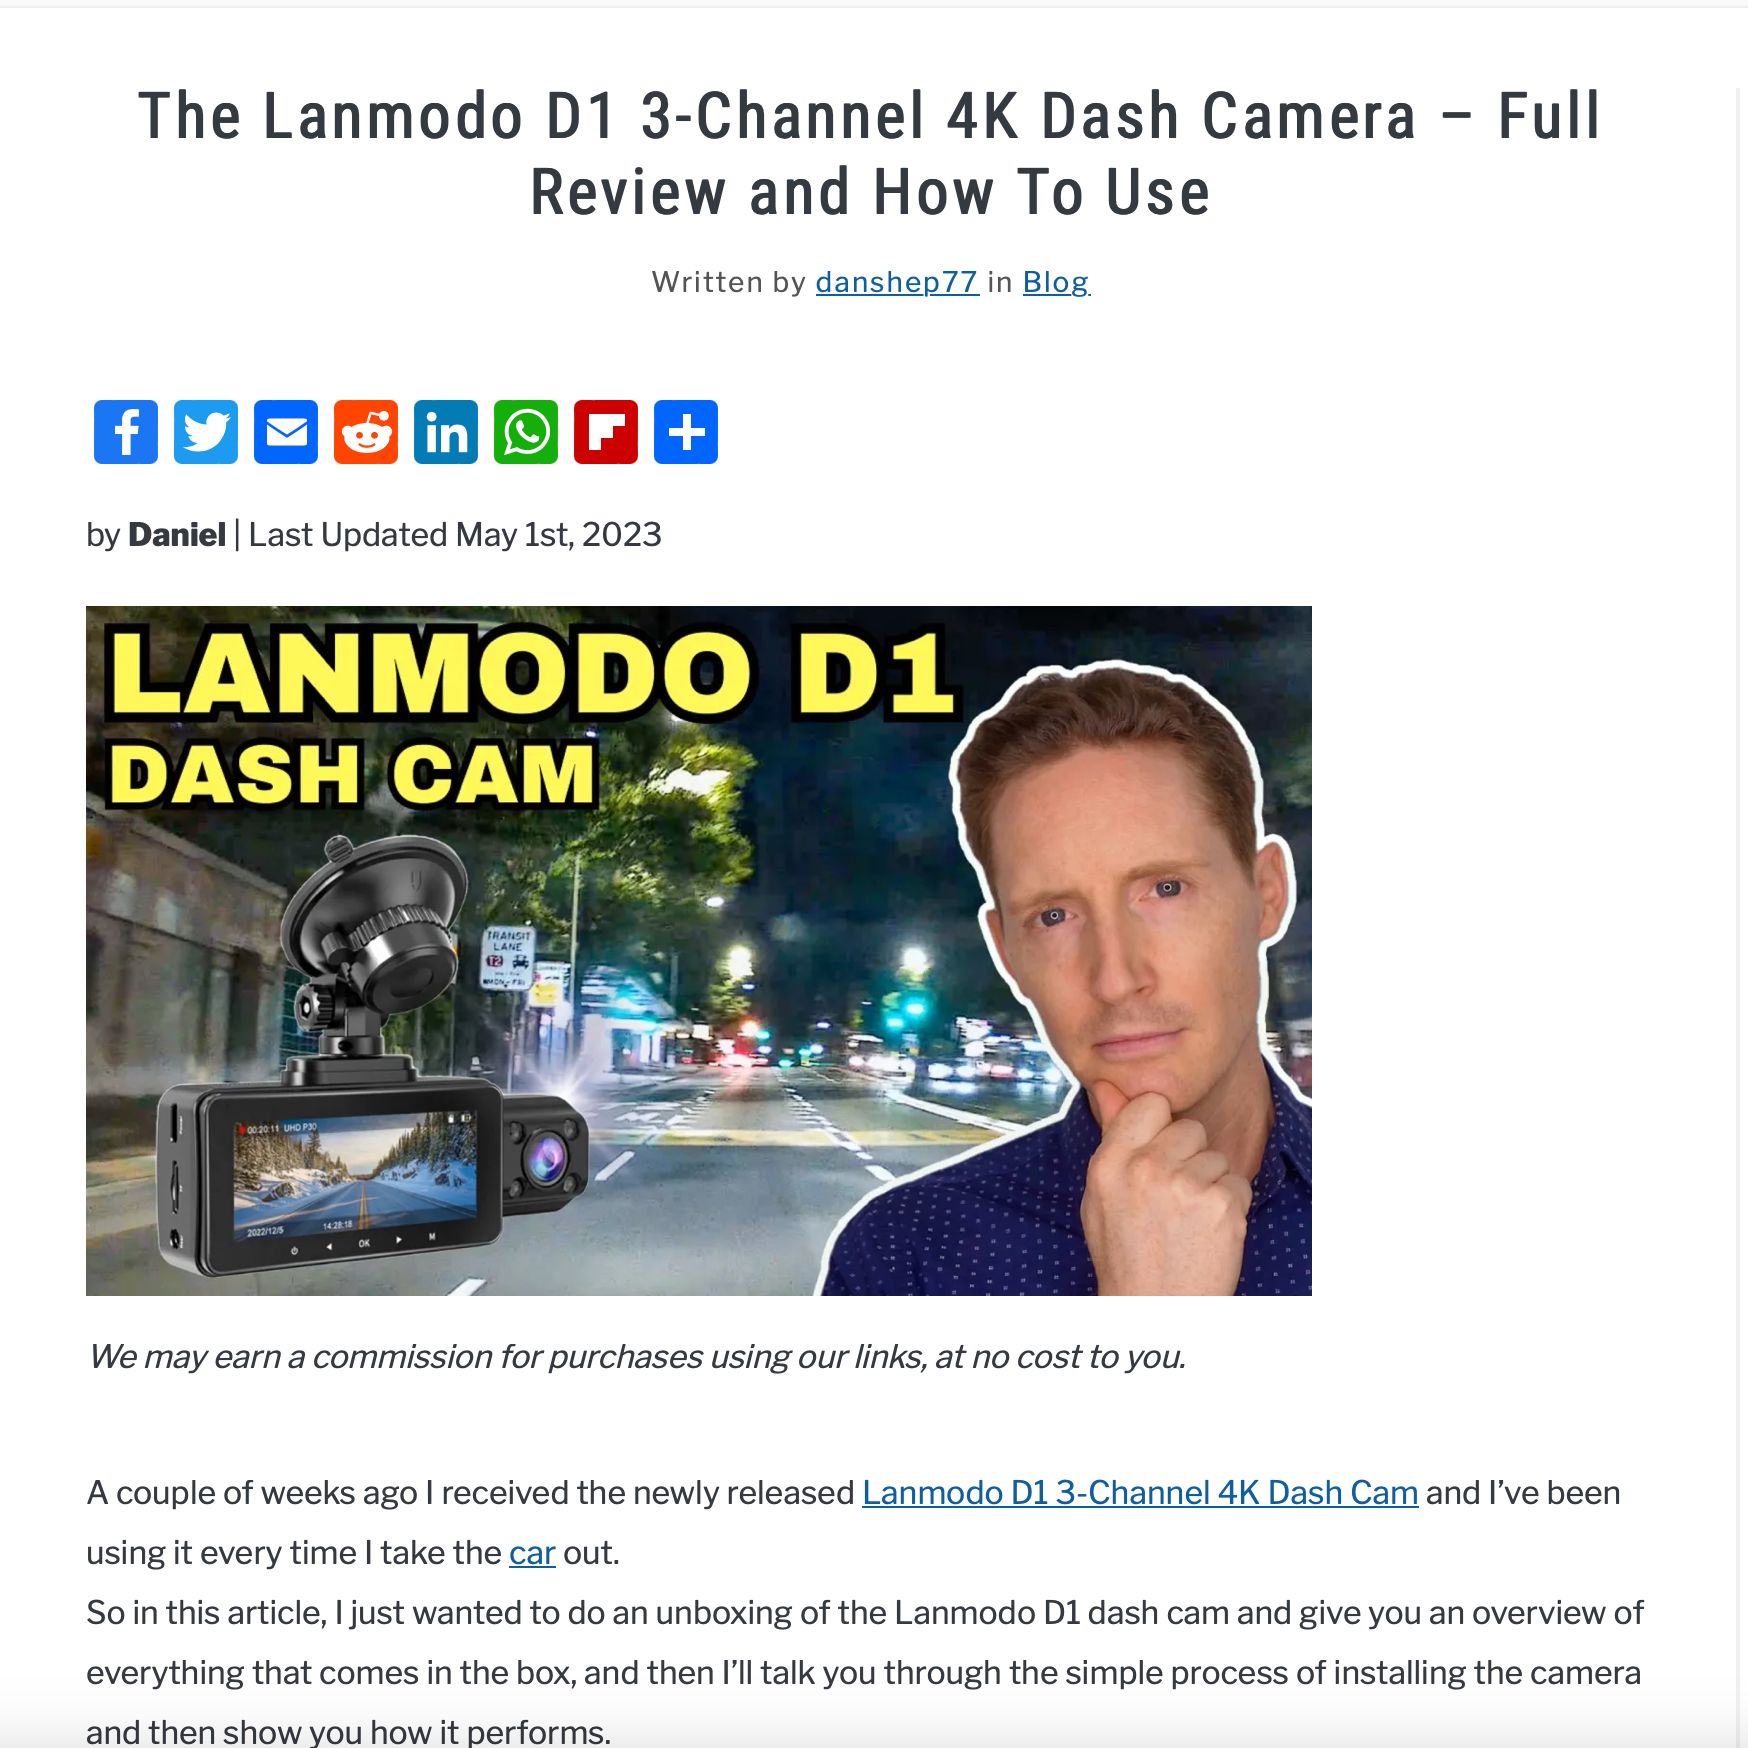 Review of the Lanmodo D1 Dash-Cam